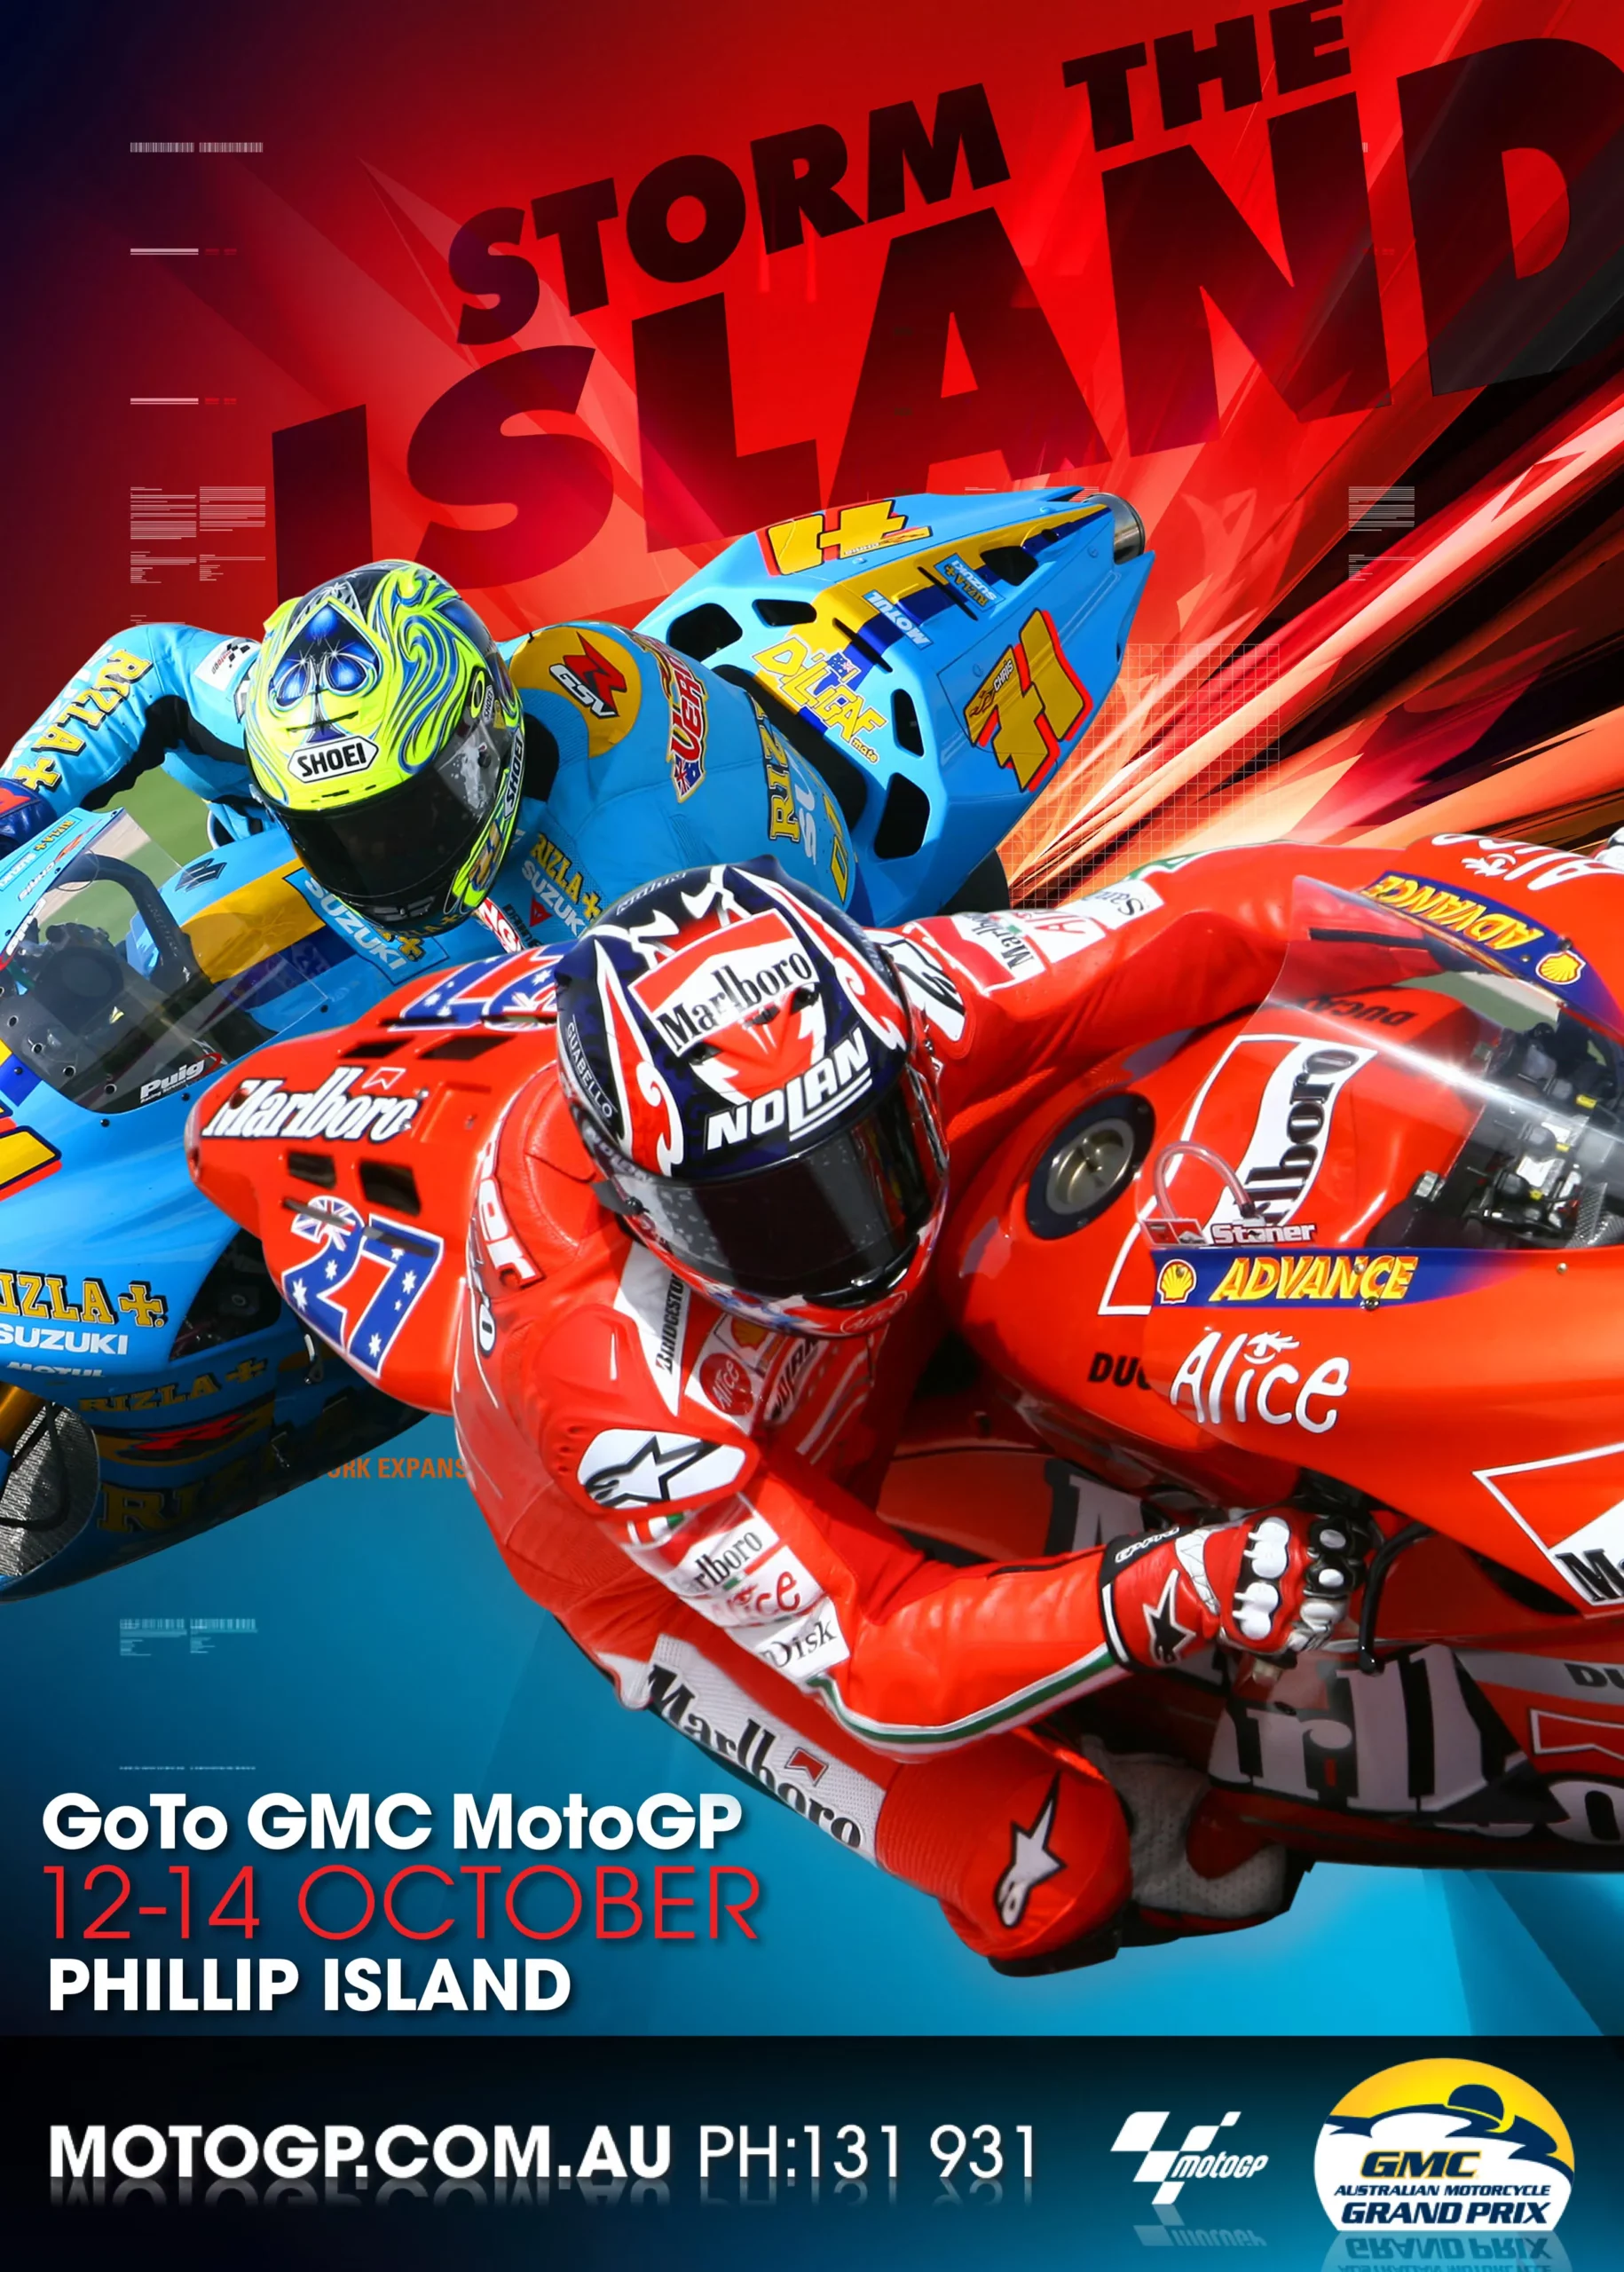 The event poster for the Australian MotoGP 